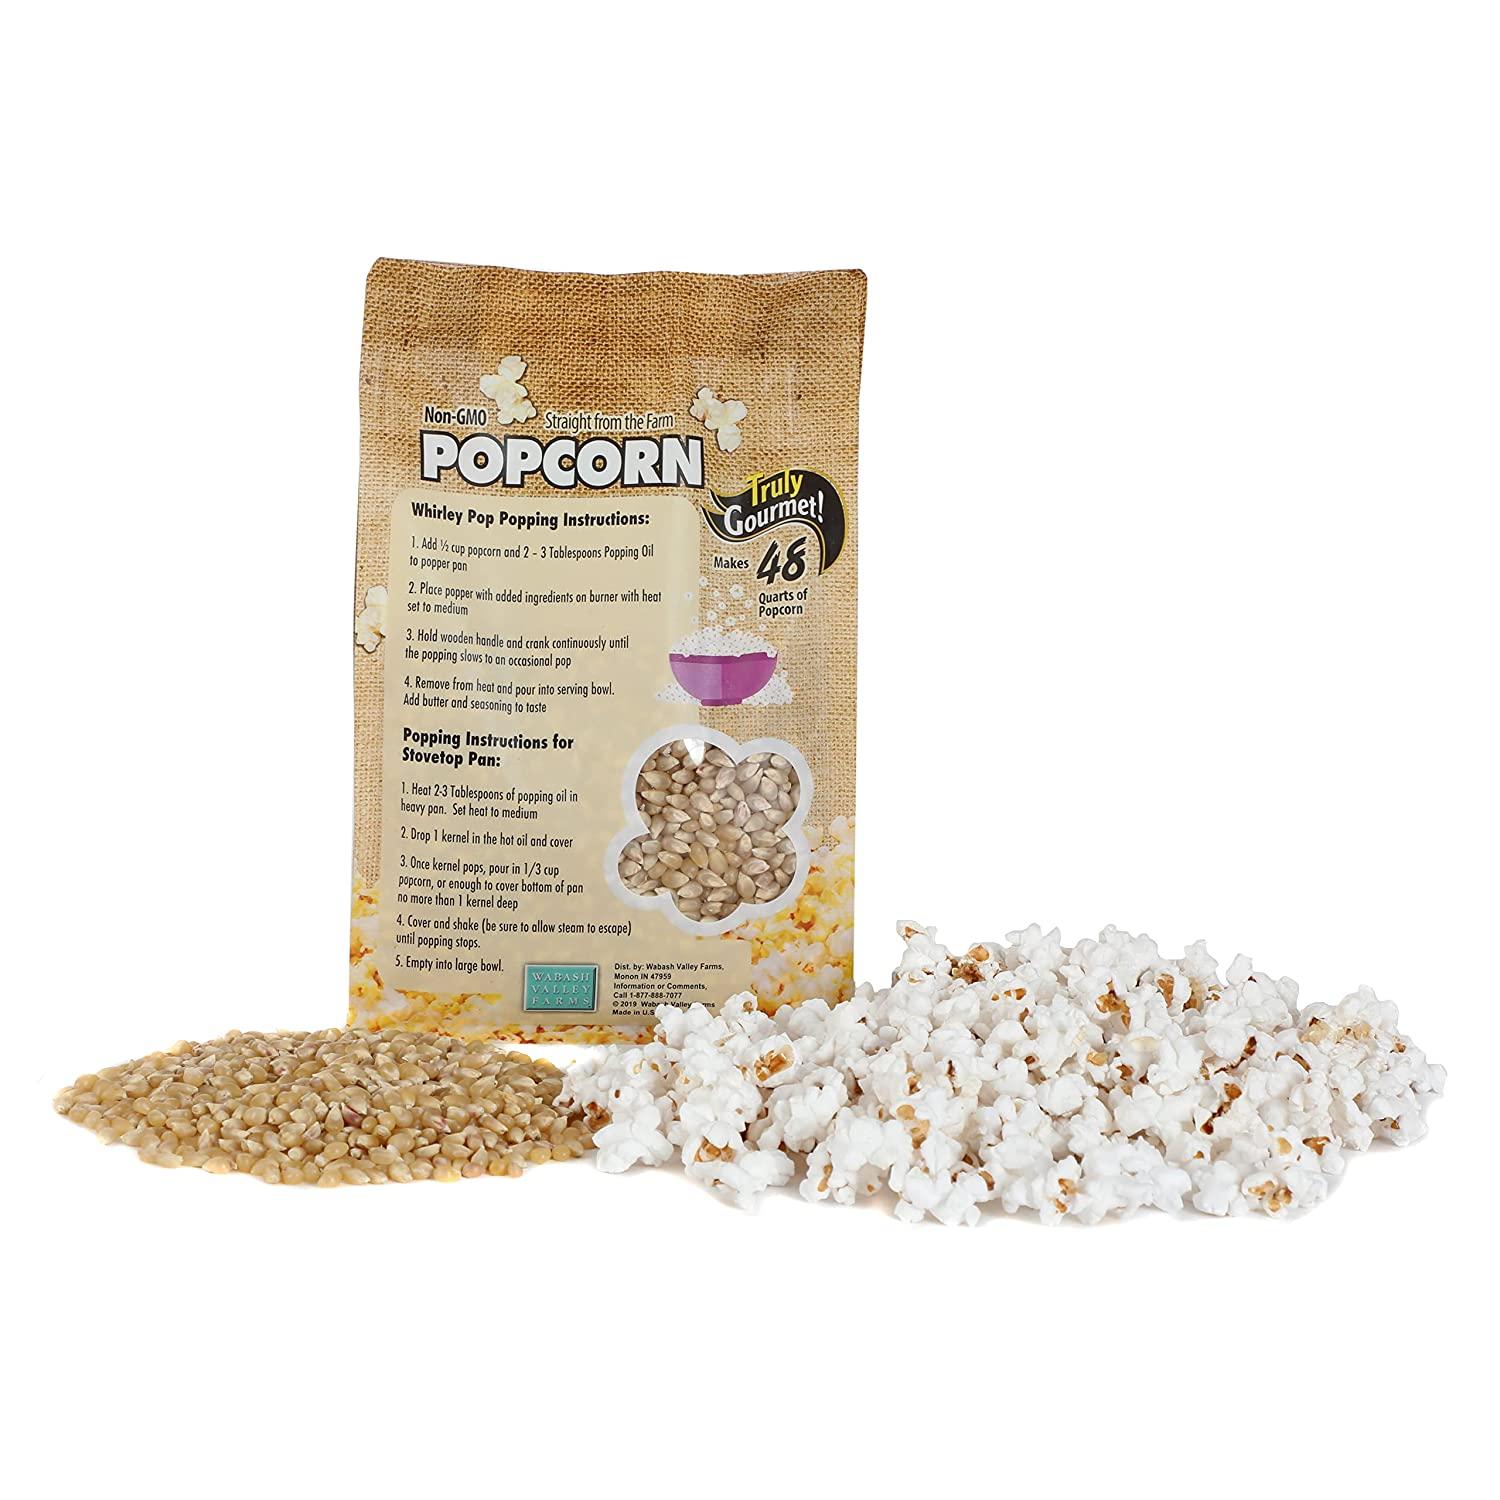 Wabash Valley Farms The Original Whirley Pop Stovetop Popcorn